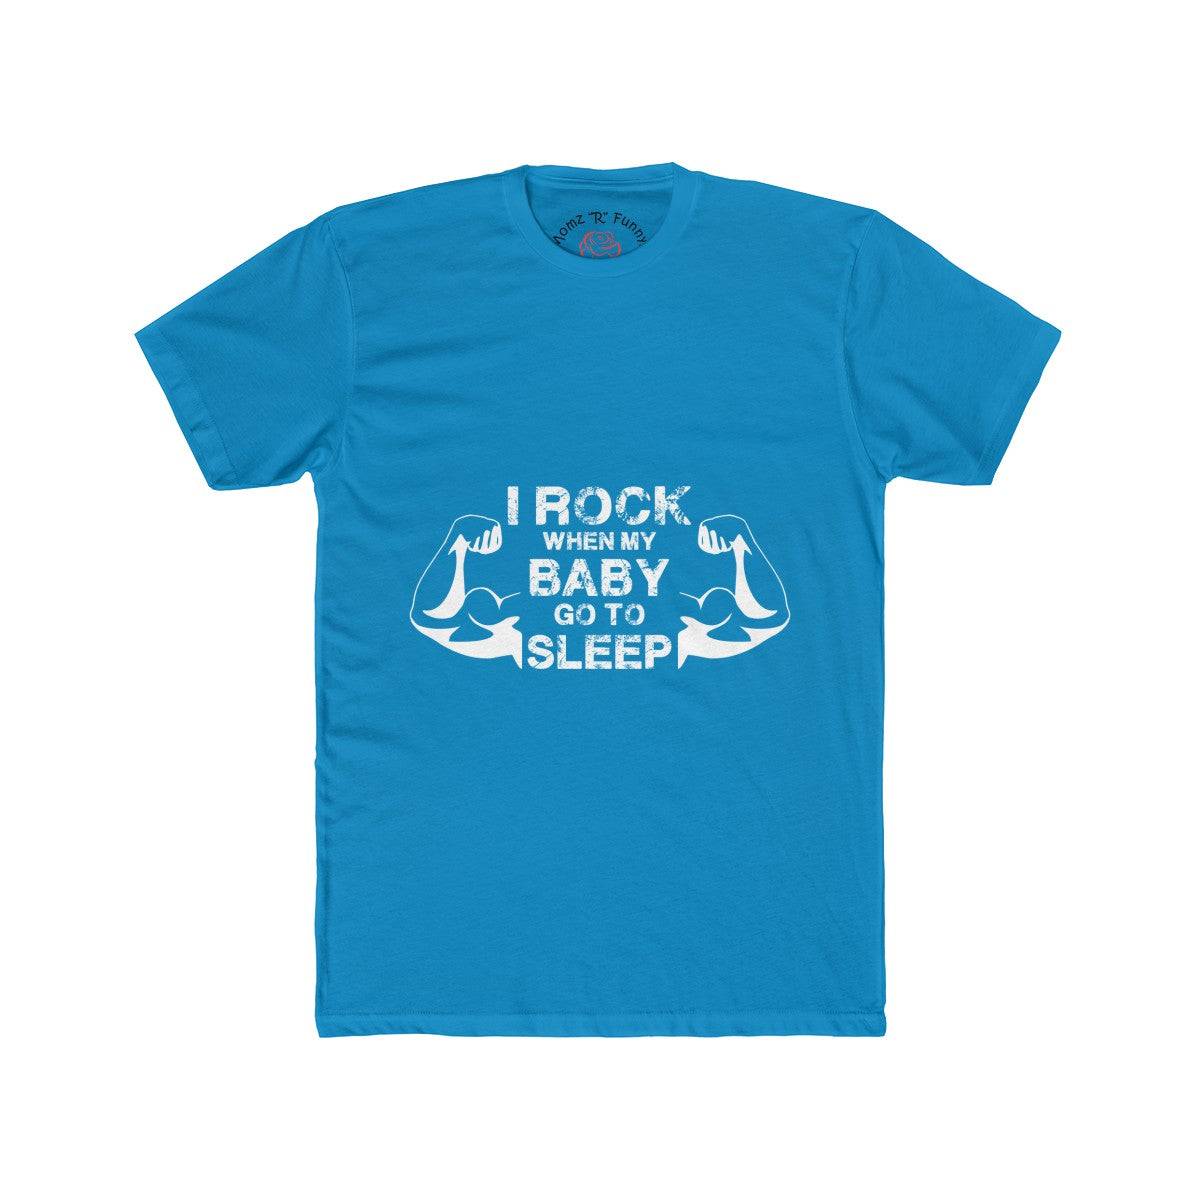 All Dad's Rock T-Shirt